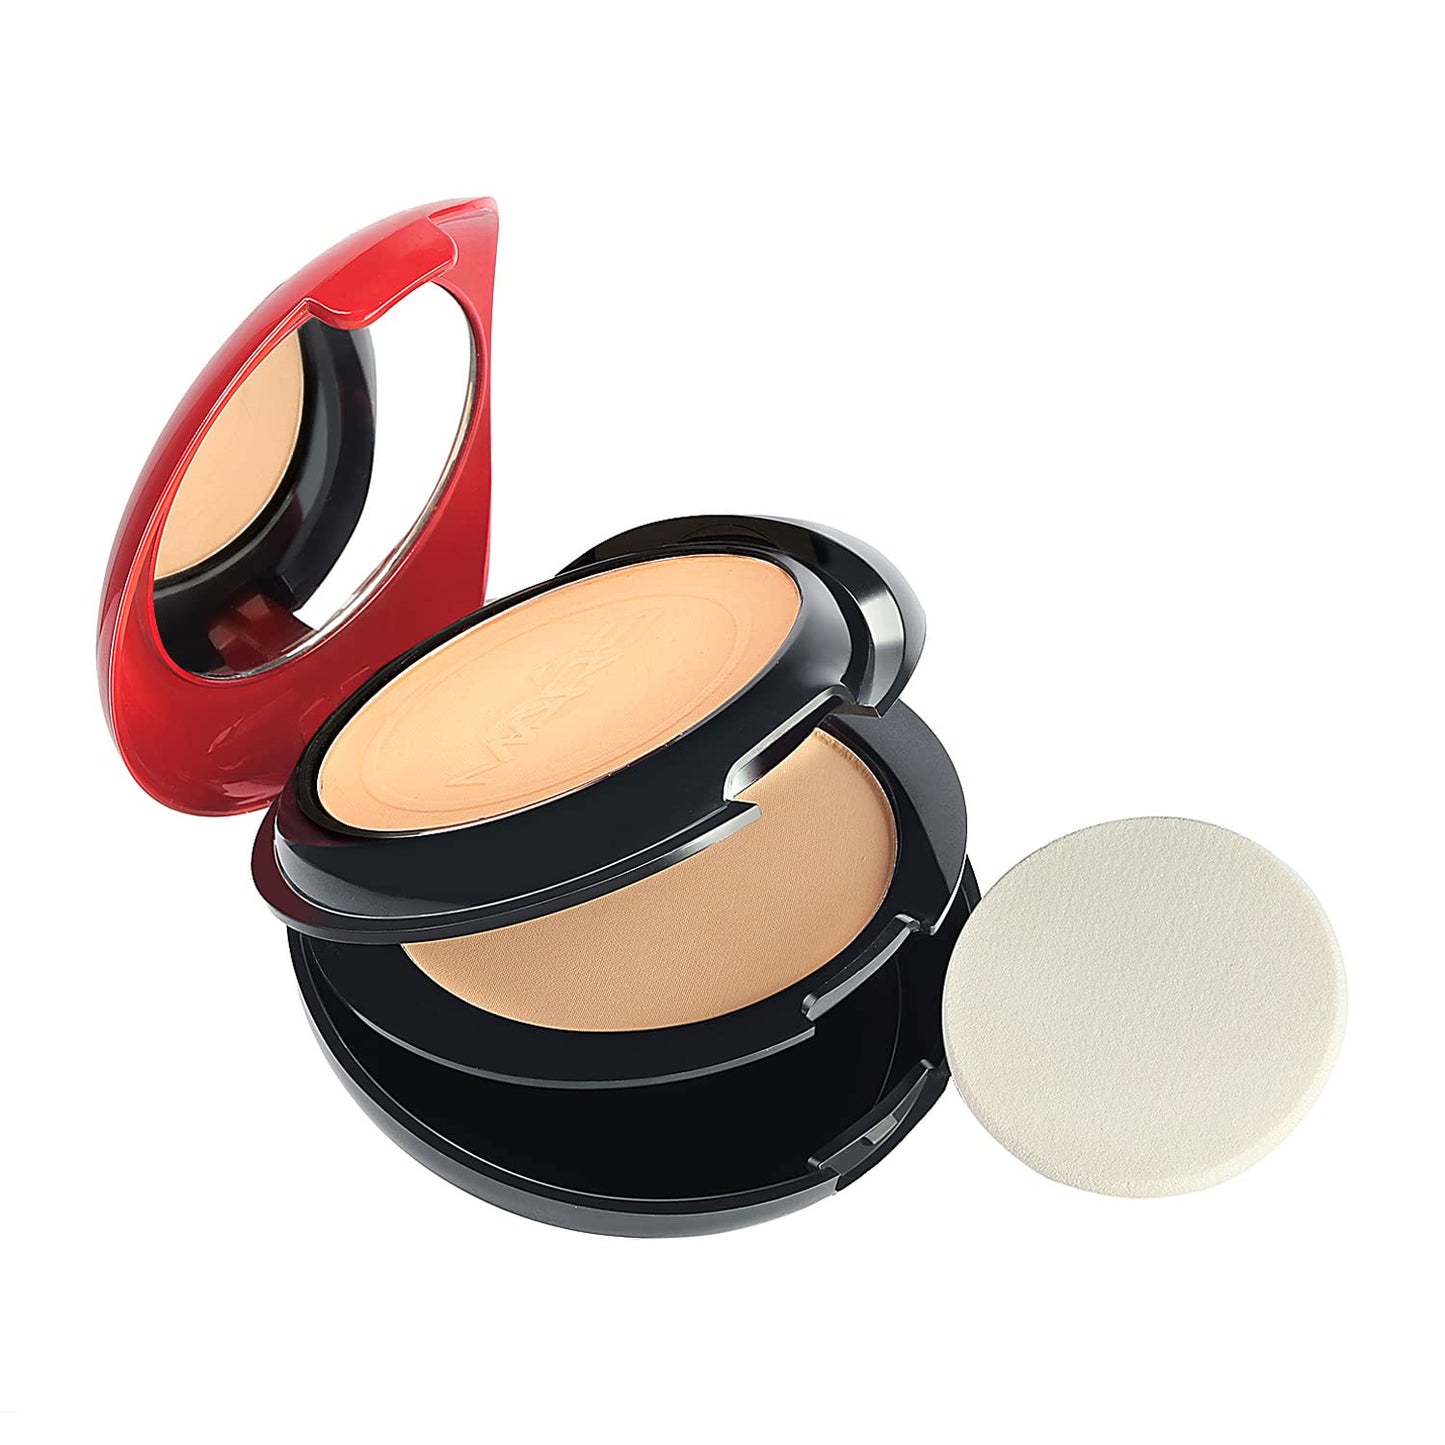 MARS Silky Skin Conceals Blemishes And Smoothes Compact Powder 20 g(Shade-03)